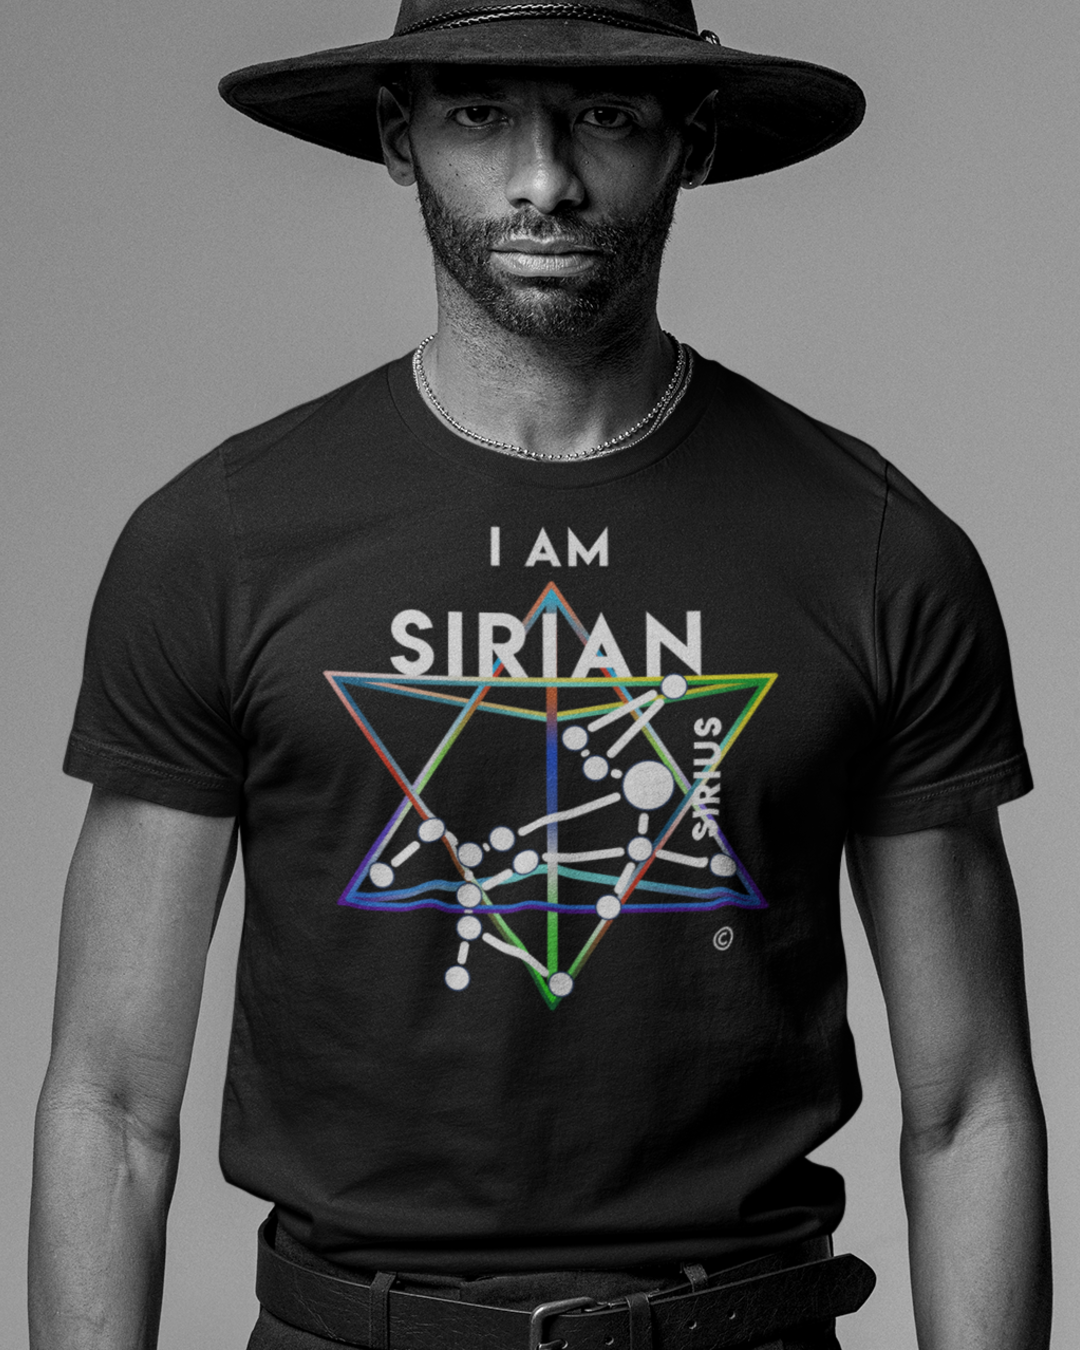 The Sirian Collection: Men's T-Shirts